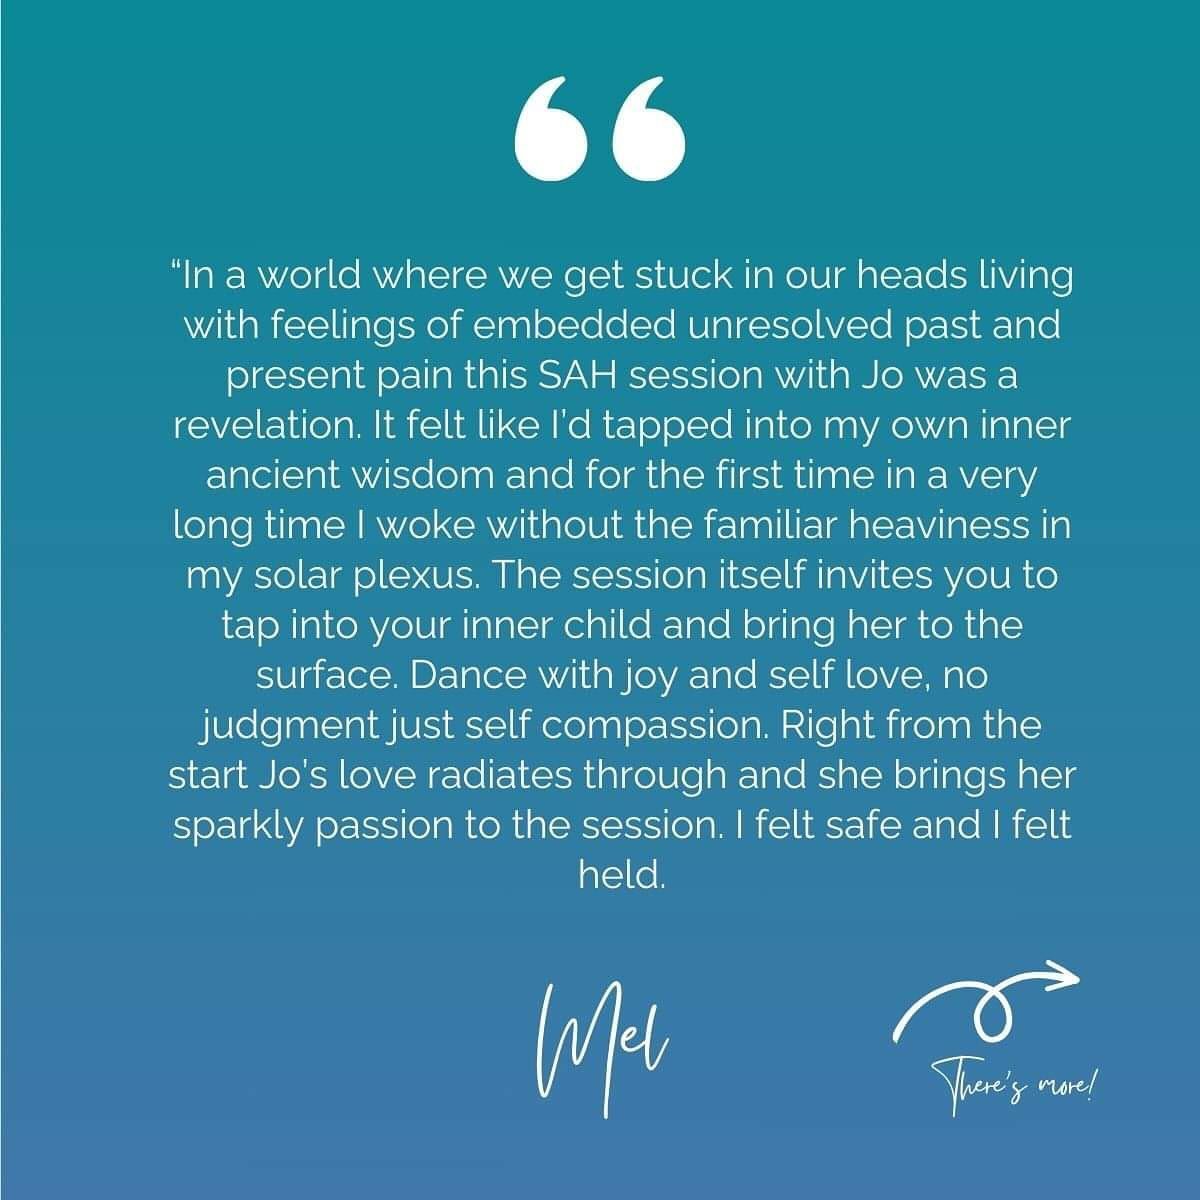 This testimonial from Mel made me emotional. I love what I do so much! We did a 1:1 session online. 

&ldquo;In a world where we get stuck in our heads living with feelings of embedded unresolved past and present pain this SAH session with Jo was a r